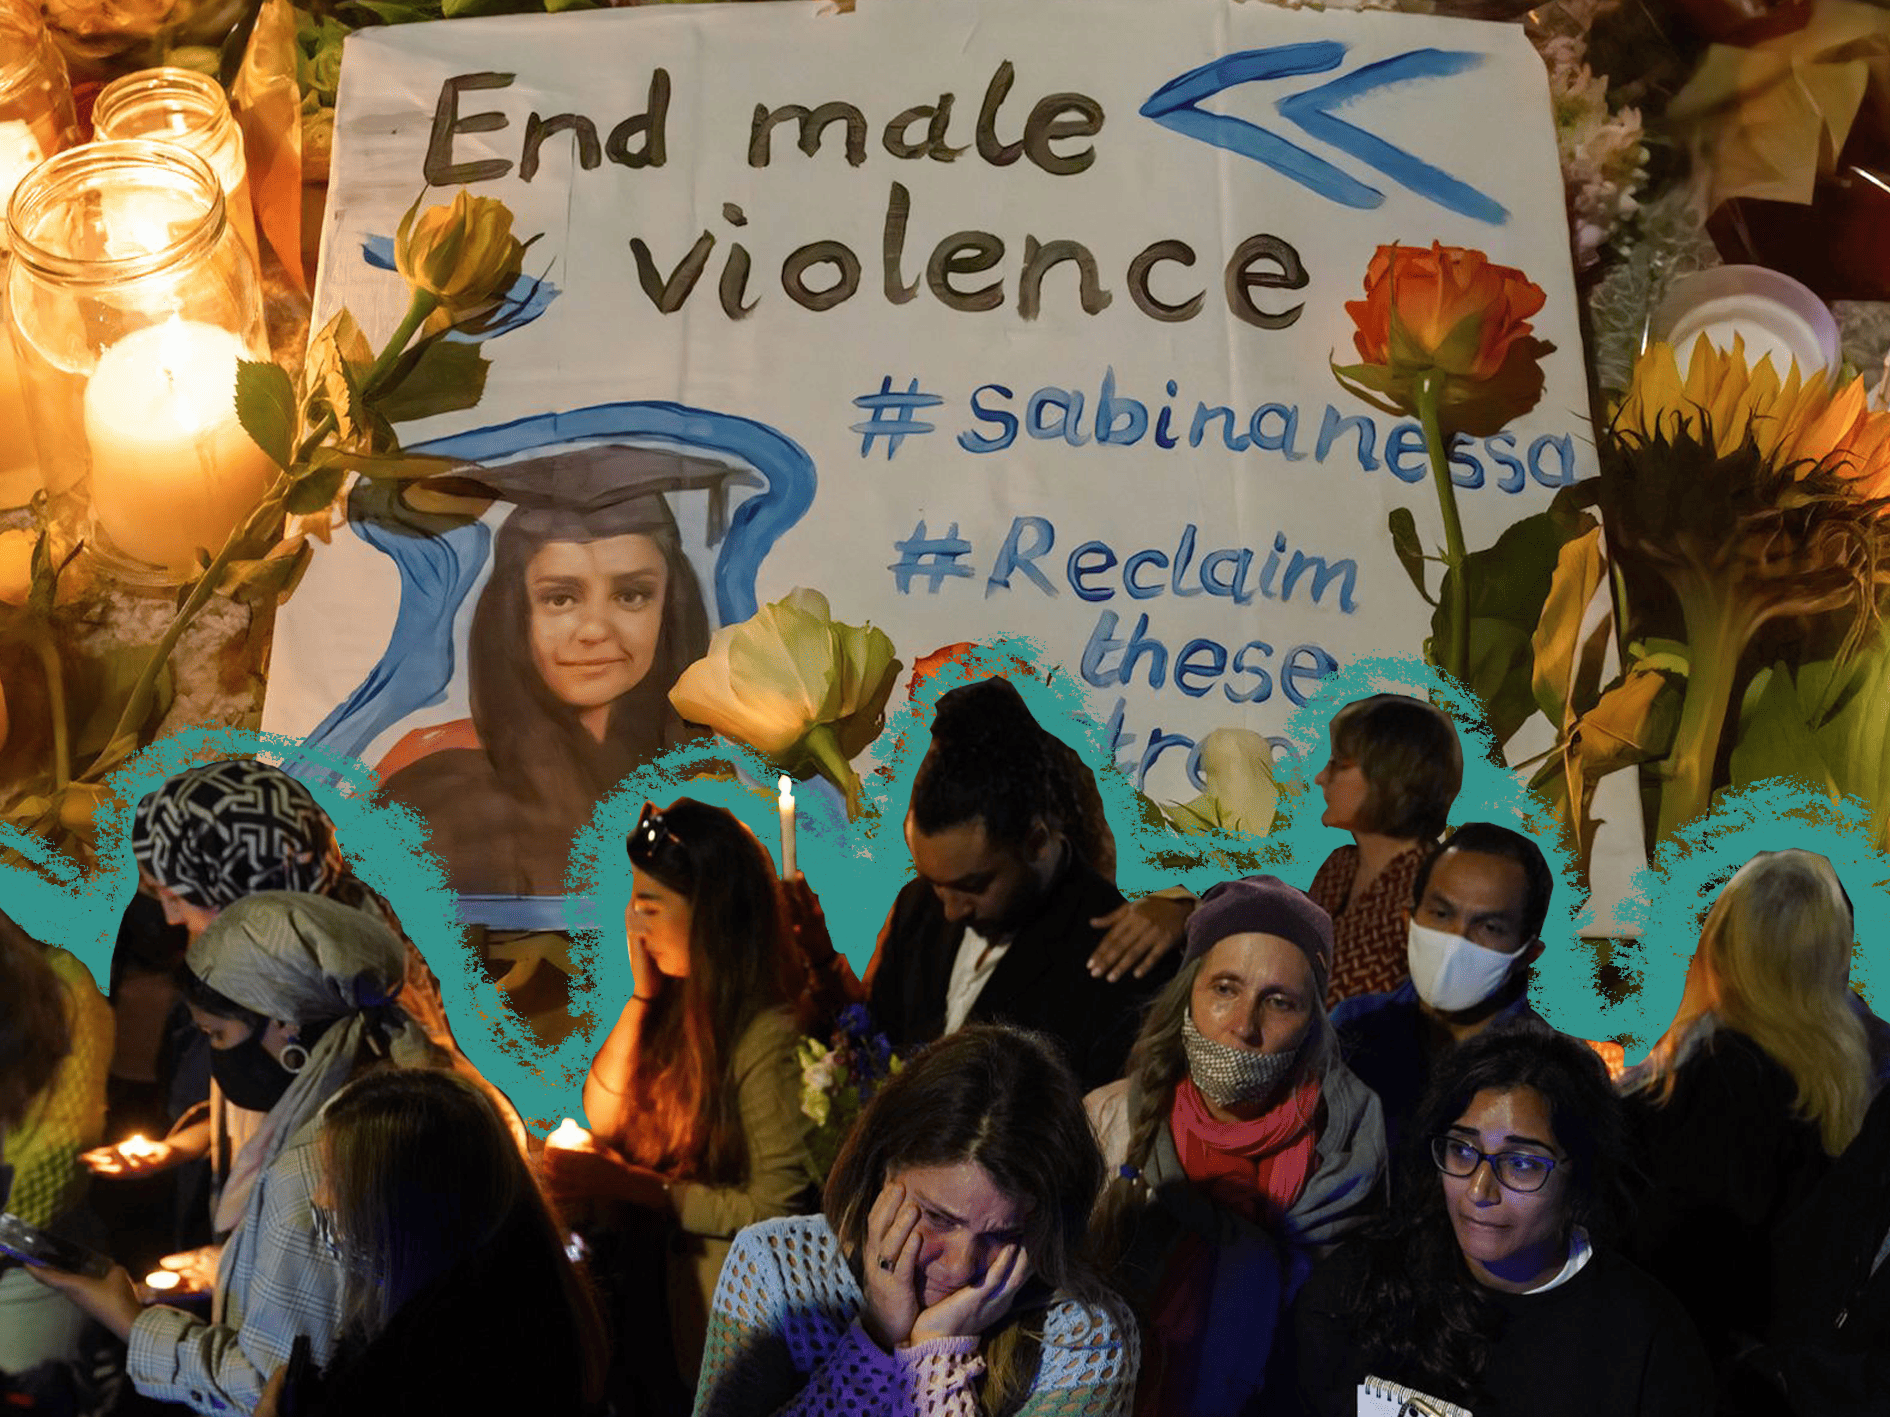 They Deserved More Than This: The Epidemic of Female Violence in the UK